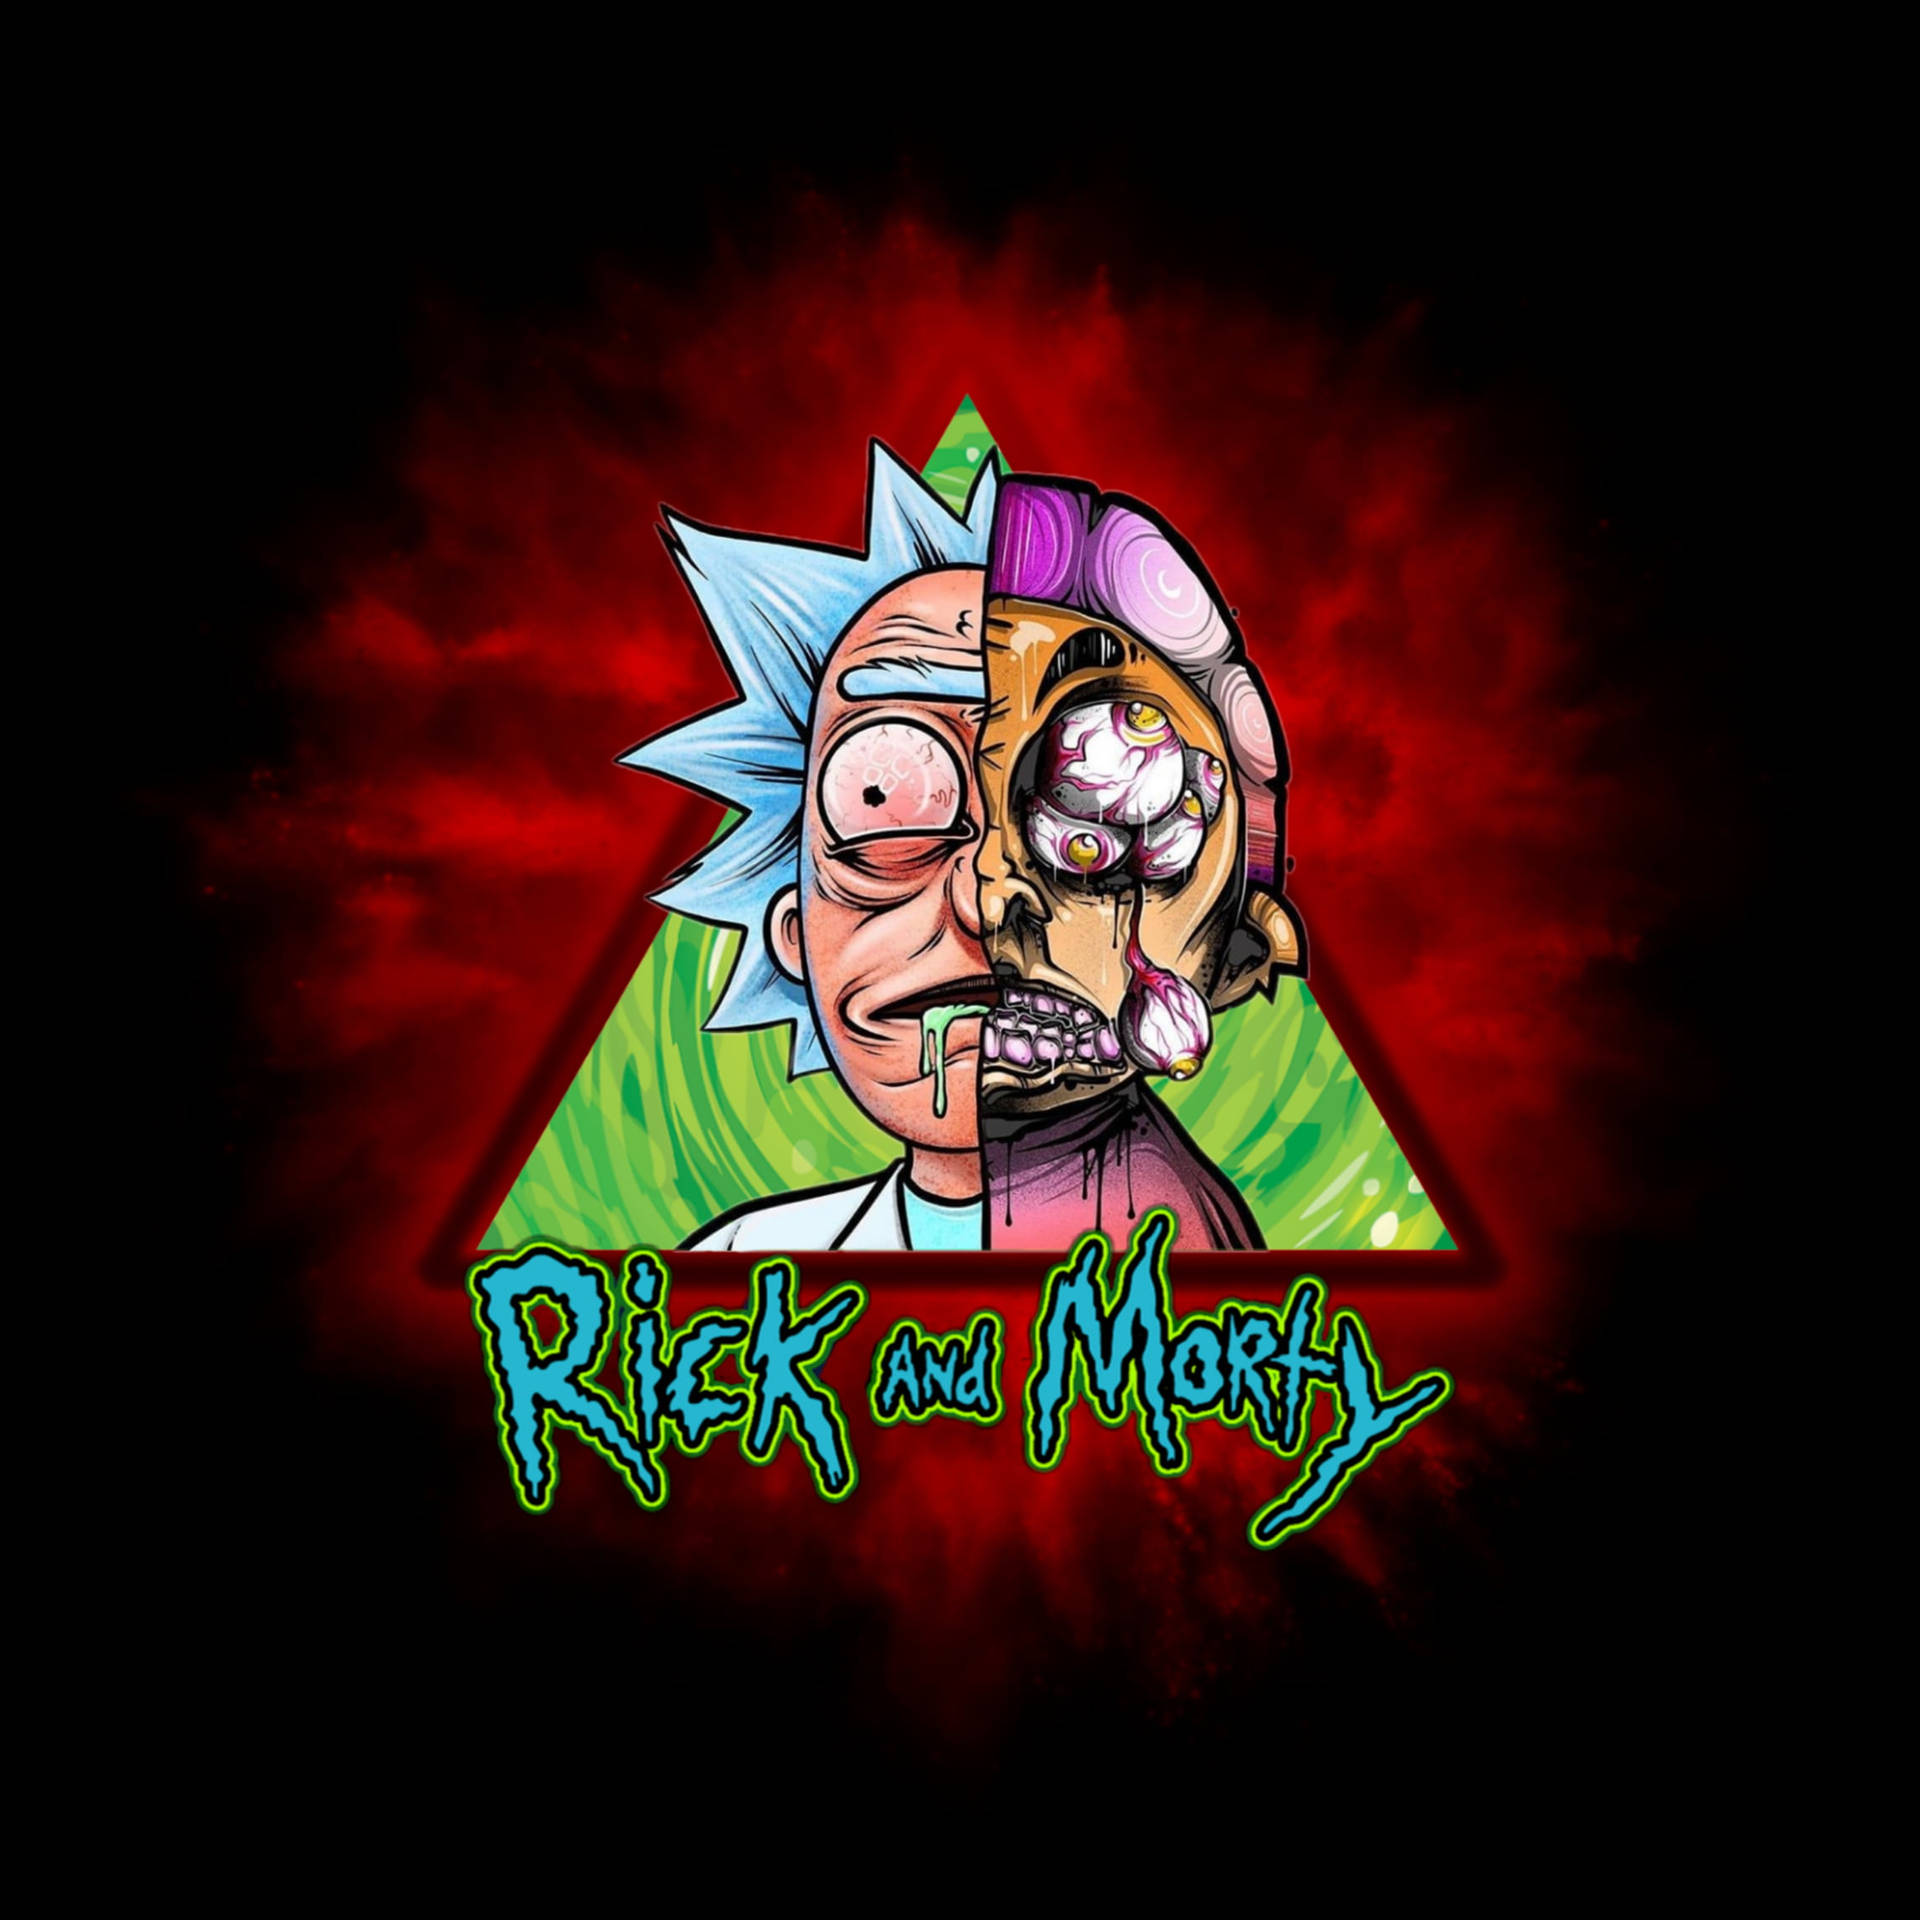 Half-Faced Rick And Morty Trippy Background Wallpaper